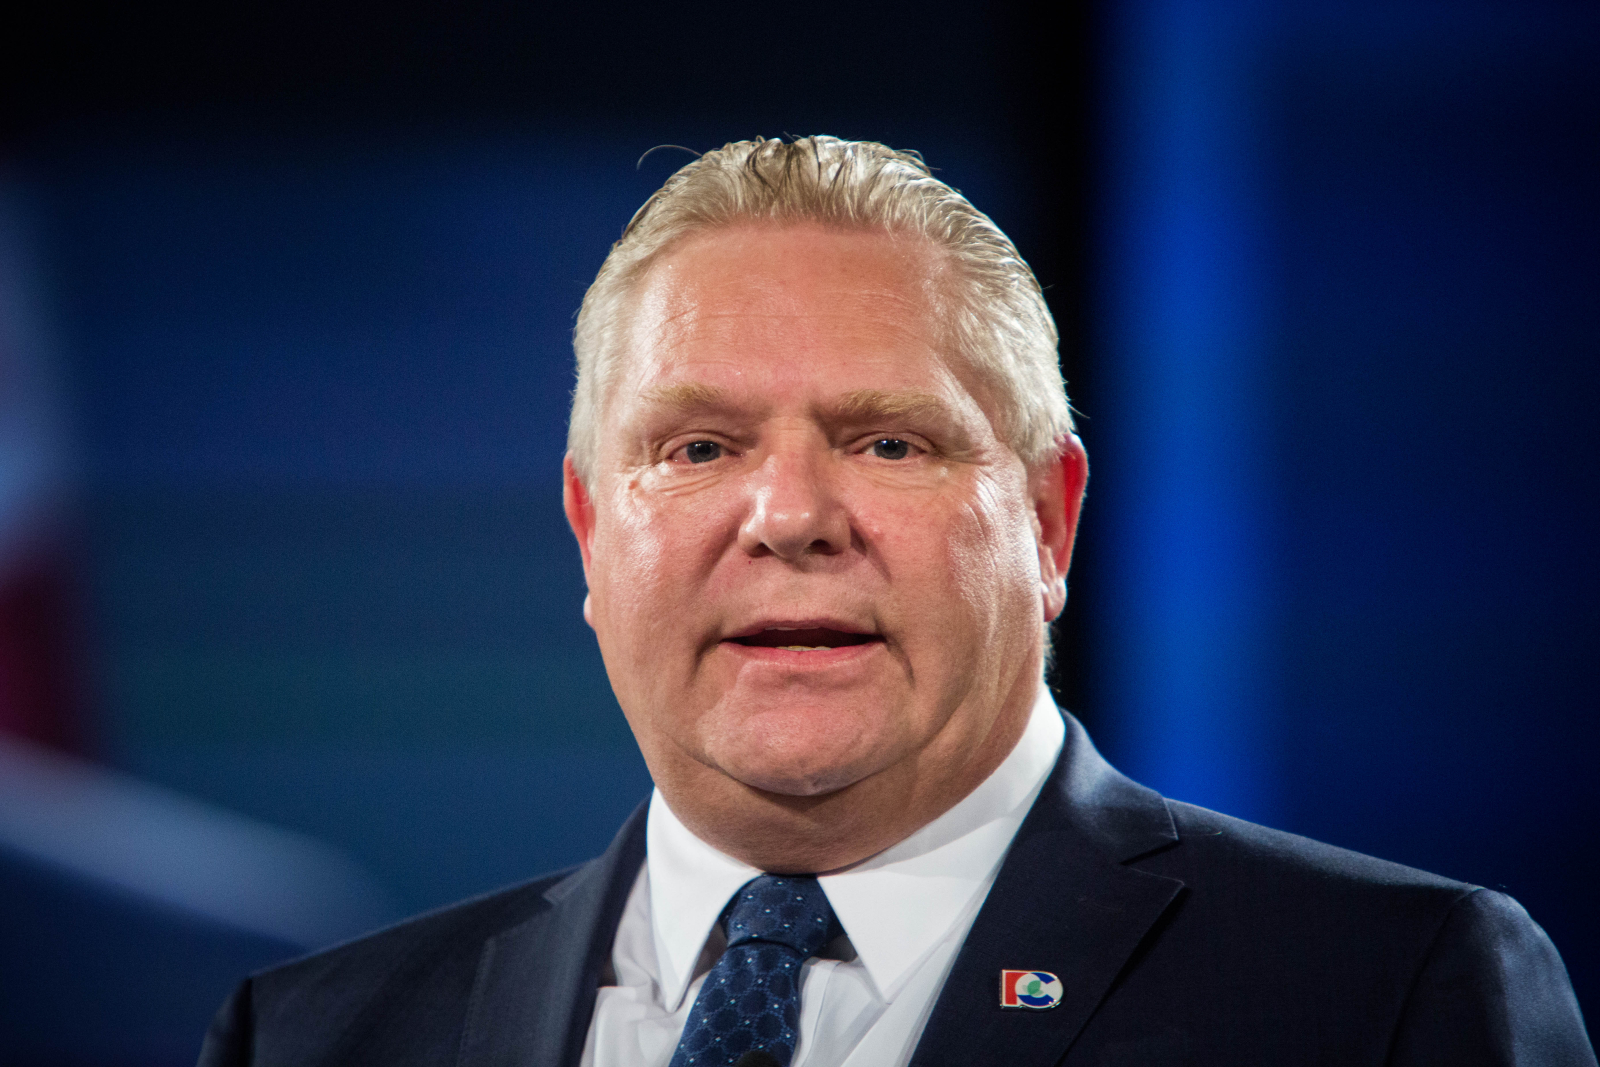 doug-ford-wants-to-work-with-jason-kenney-to-beat-carbon-tax-national